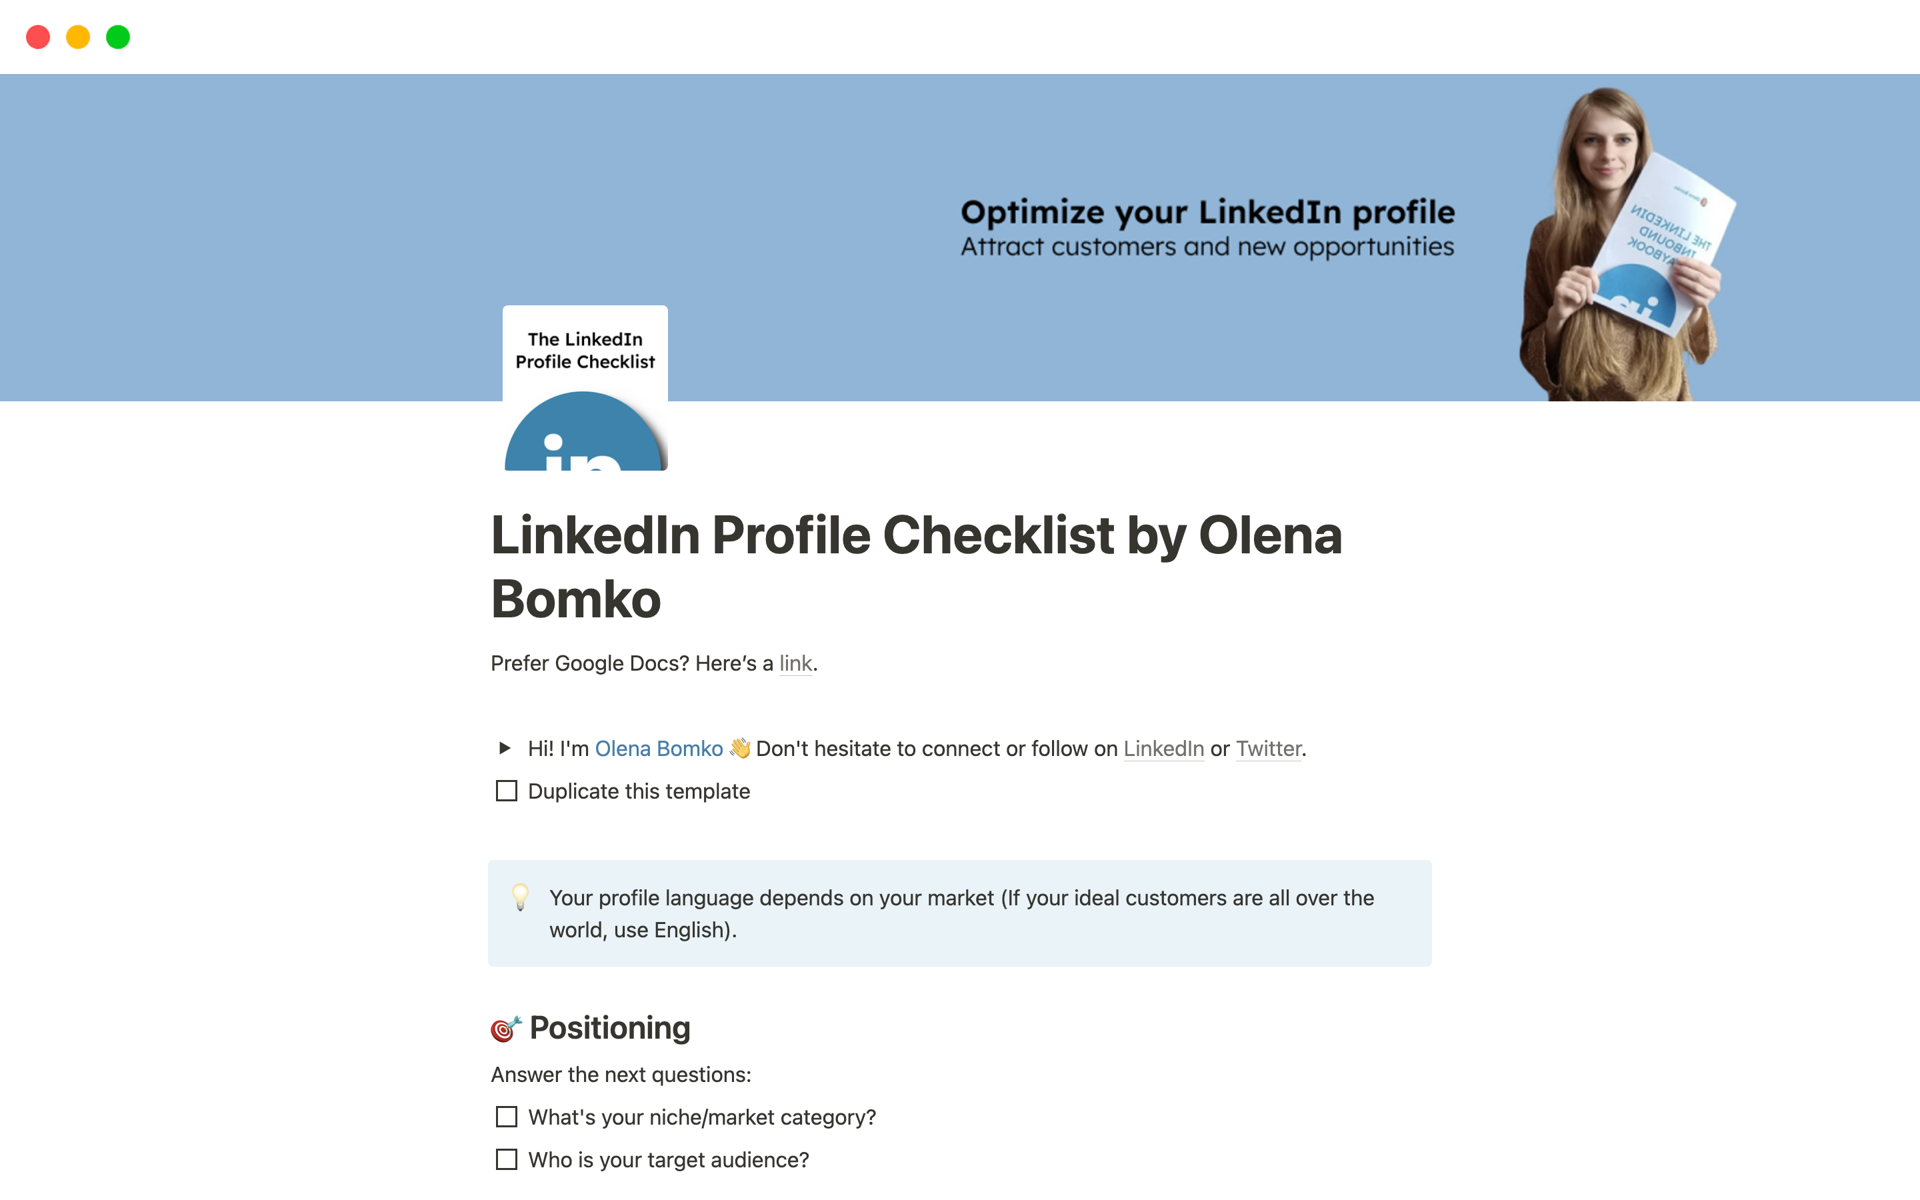 Optimize your LinkedIn profile and attract new opportunities.